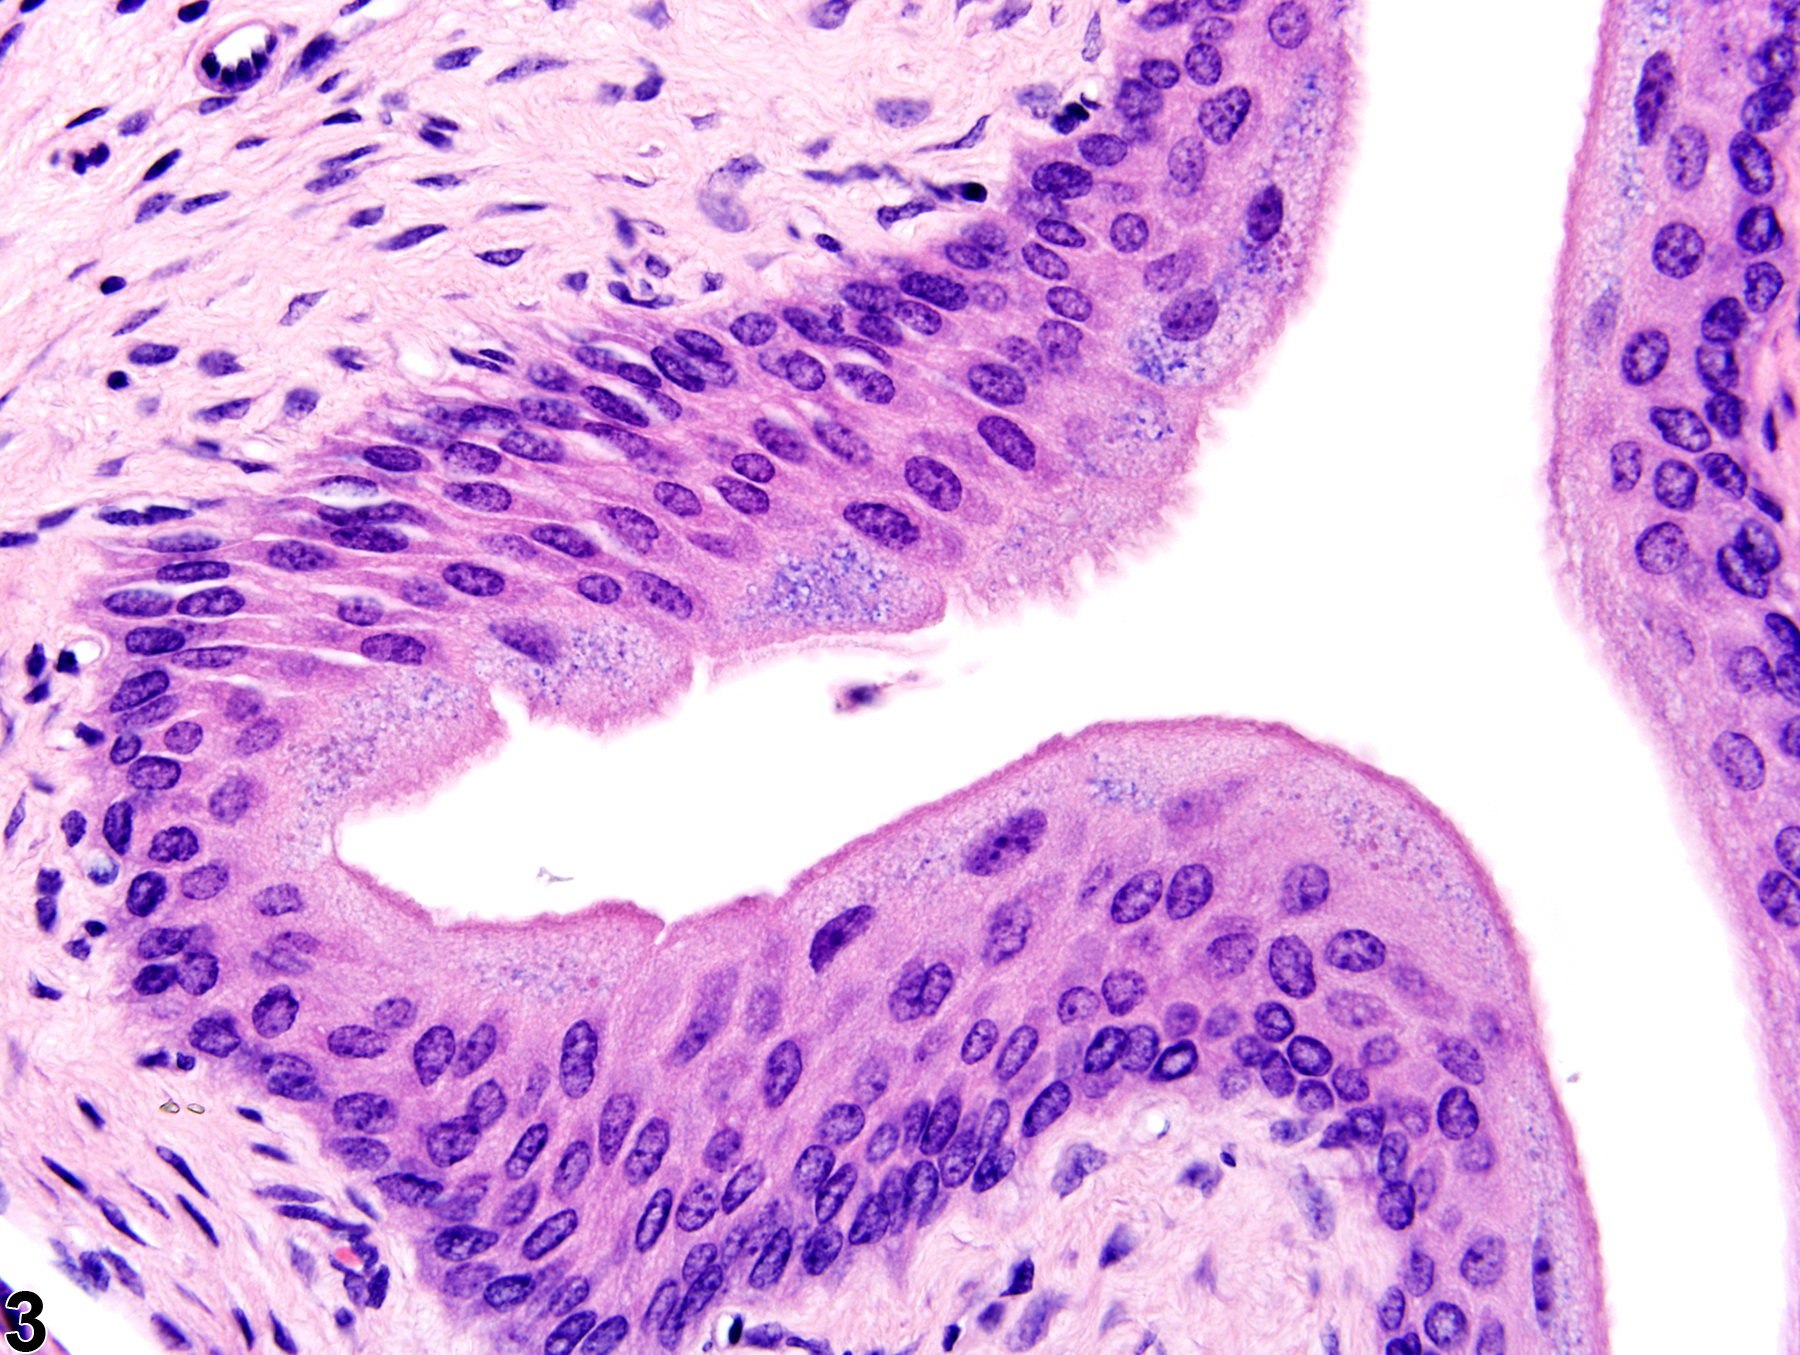 Image of cytoplasmic granules in the urinary bladder from a male B6C3F1 mouse in an acute study